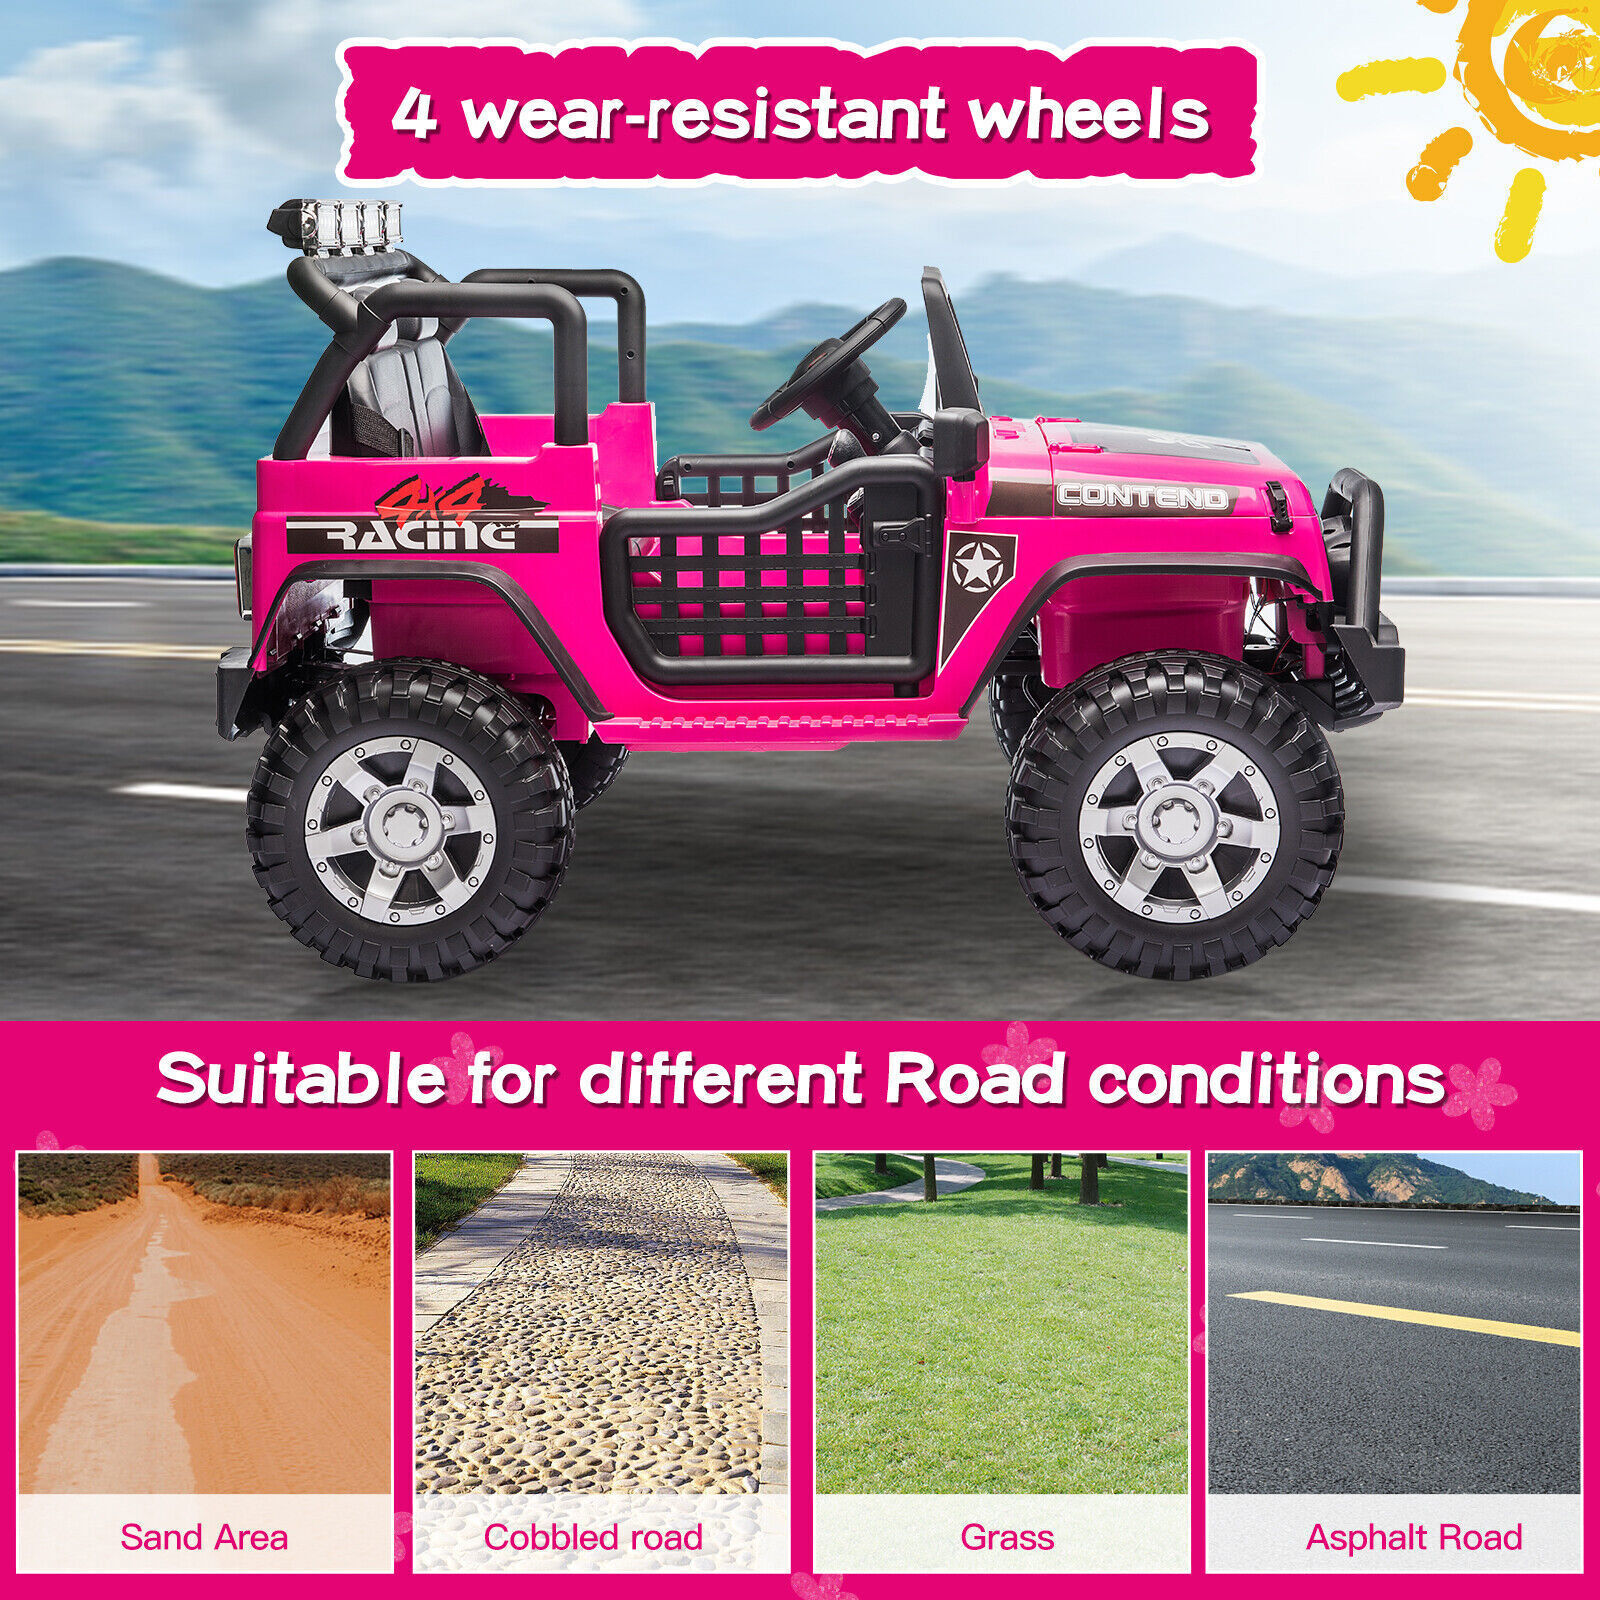 Dazone 12V Kids Ride on Jeep Car, Electric 2 Seats Off-road Jeep Ride on Truck Vehicle with Remote Control, LED Lights, MP3 Music, Pink - image 3 of 8